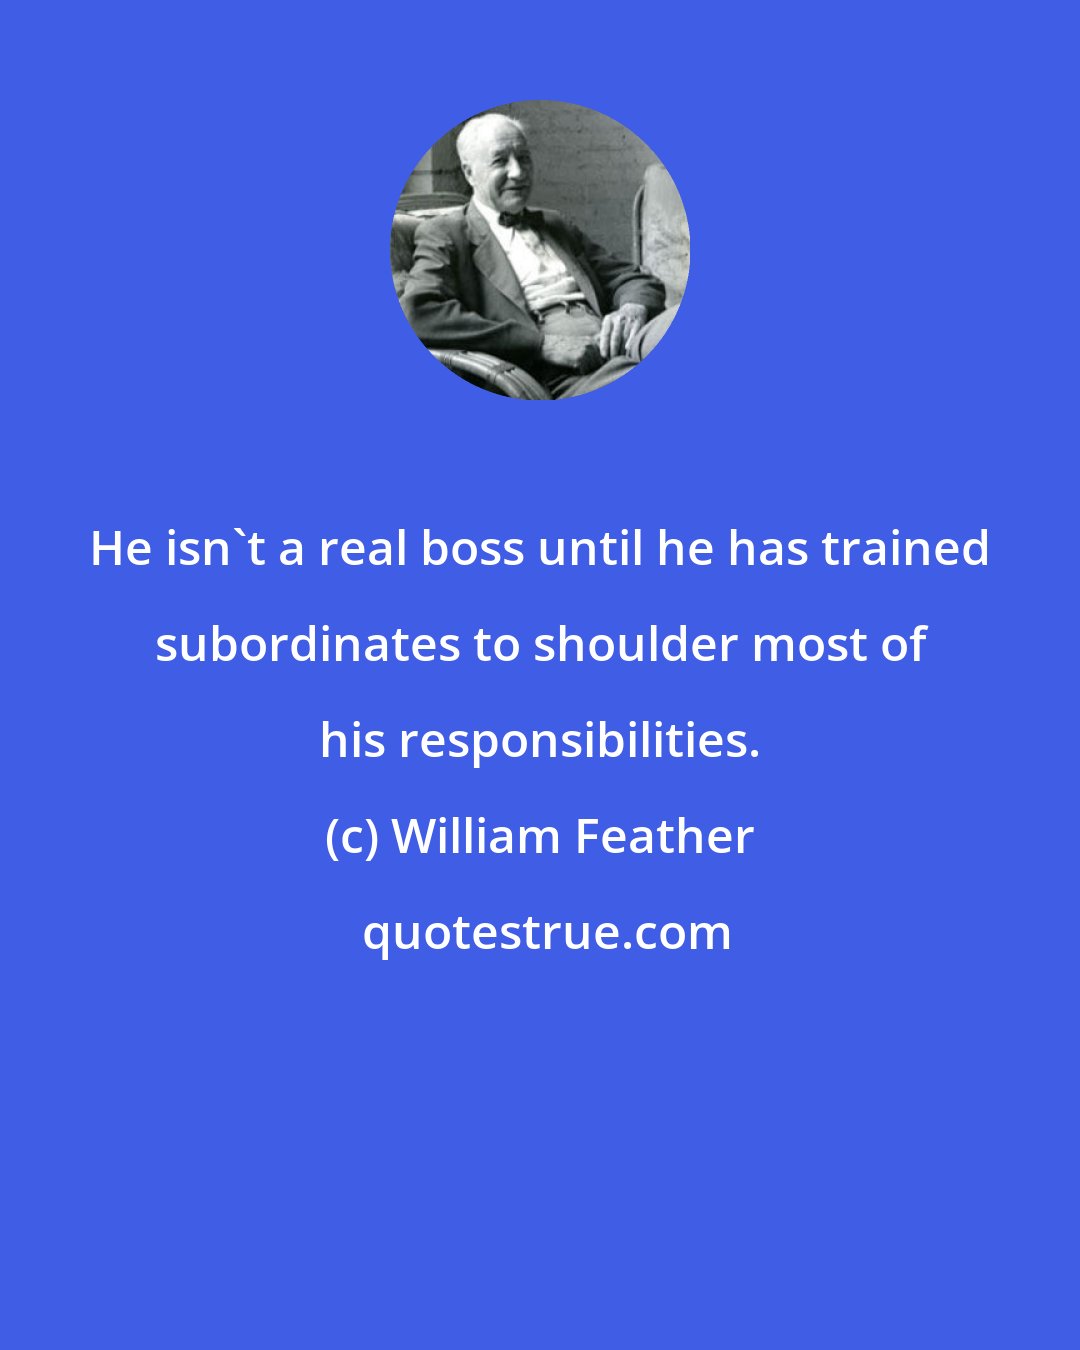 William Feather: He isn't a real boss until he has trained subordinates to shoulder most of his responsibilities.